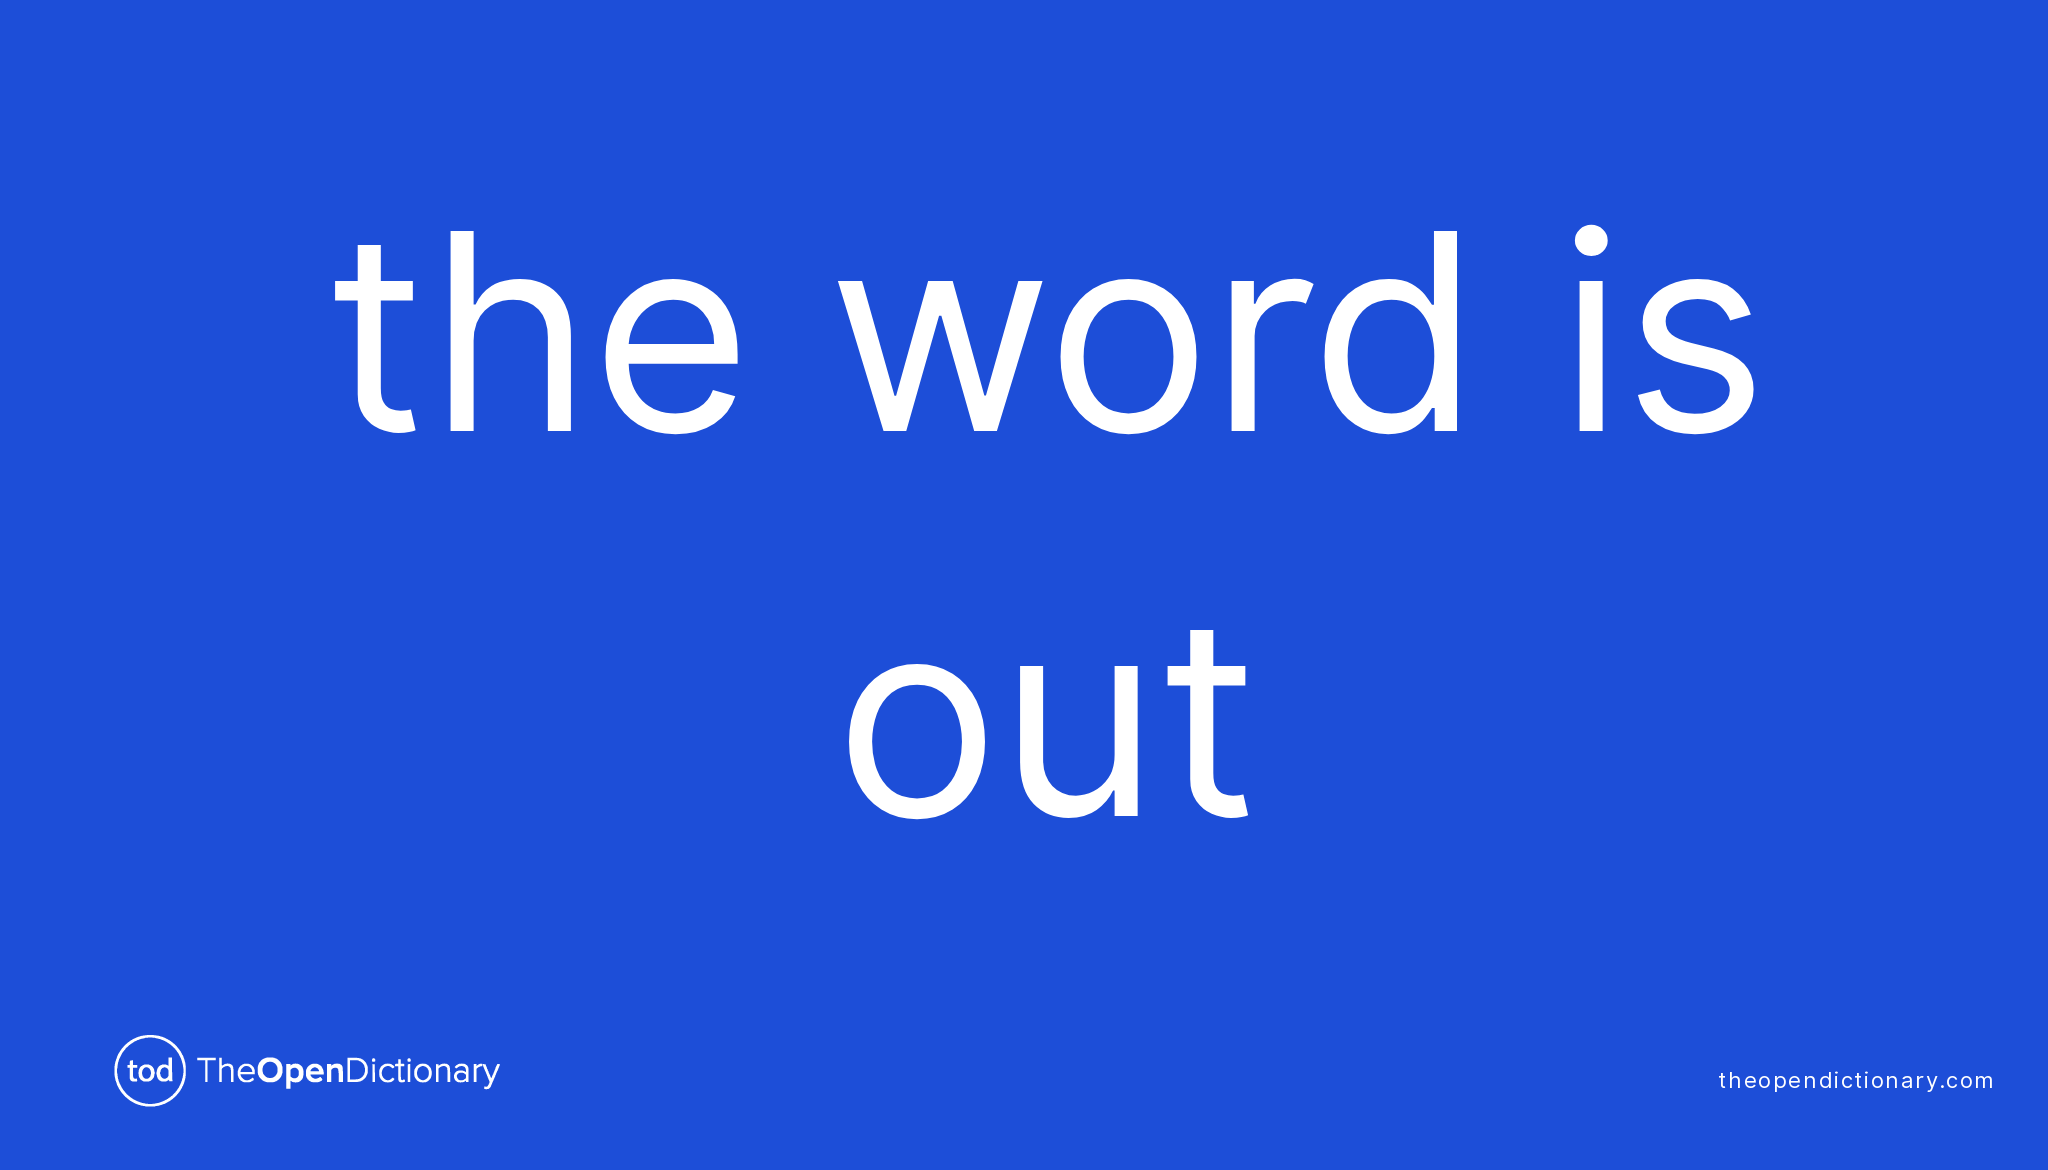 the-word-is-out-what-is-the-definition-and-meaning-of-idiom-the-word